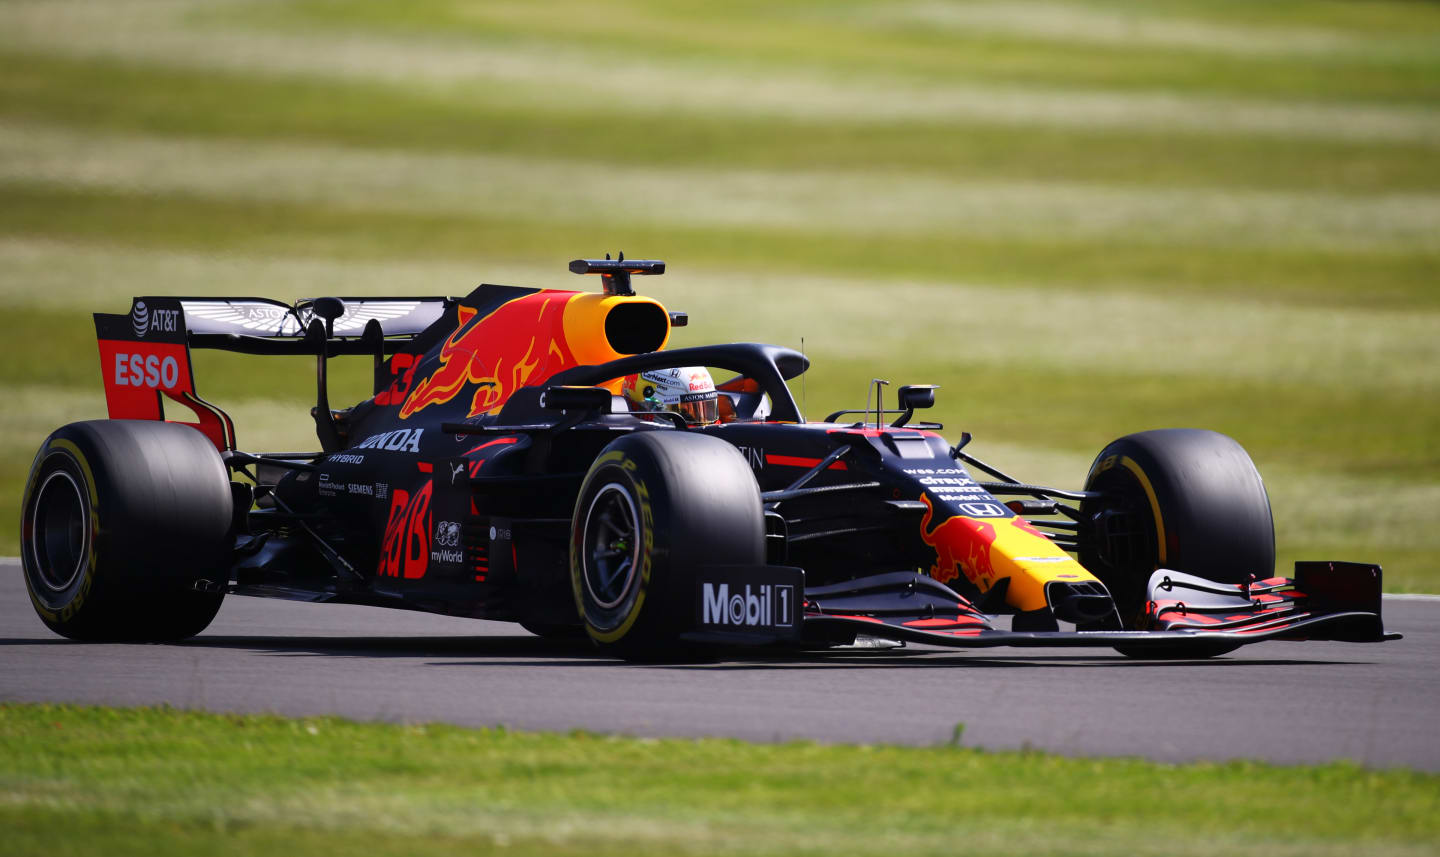 NORTHAMPTON, ENGLAND - JULY 31: Max Verstappen of the Netherlands driving the (33) Aston Martin Red